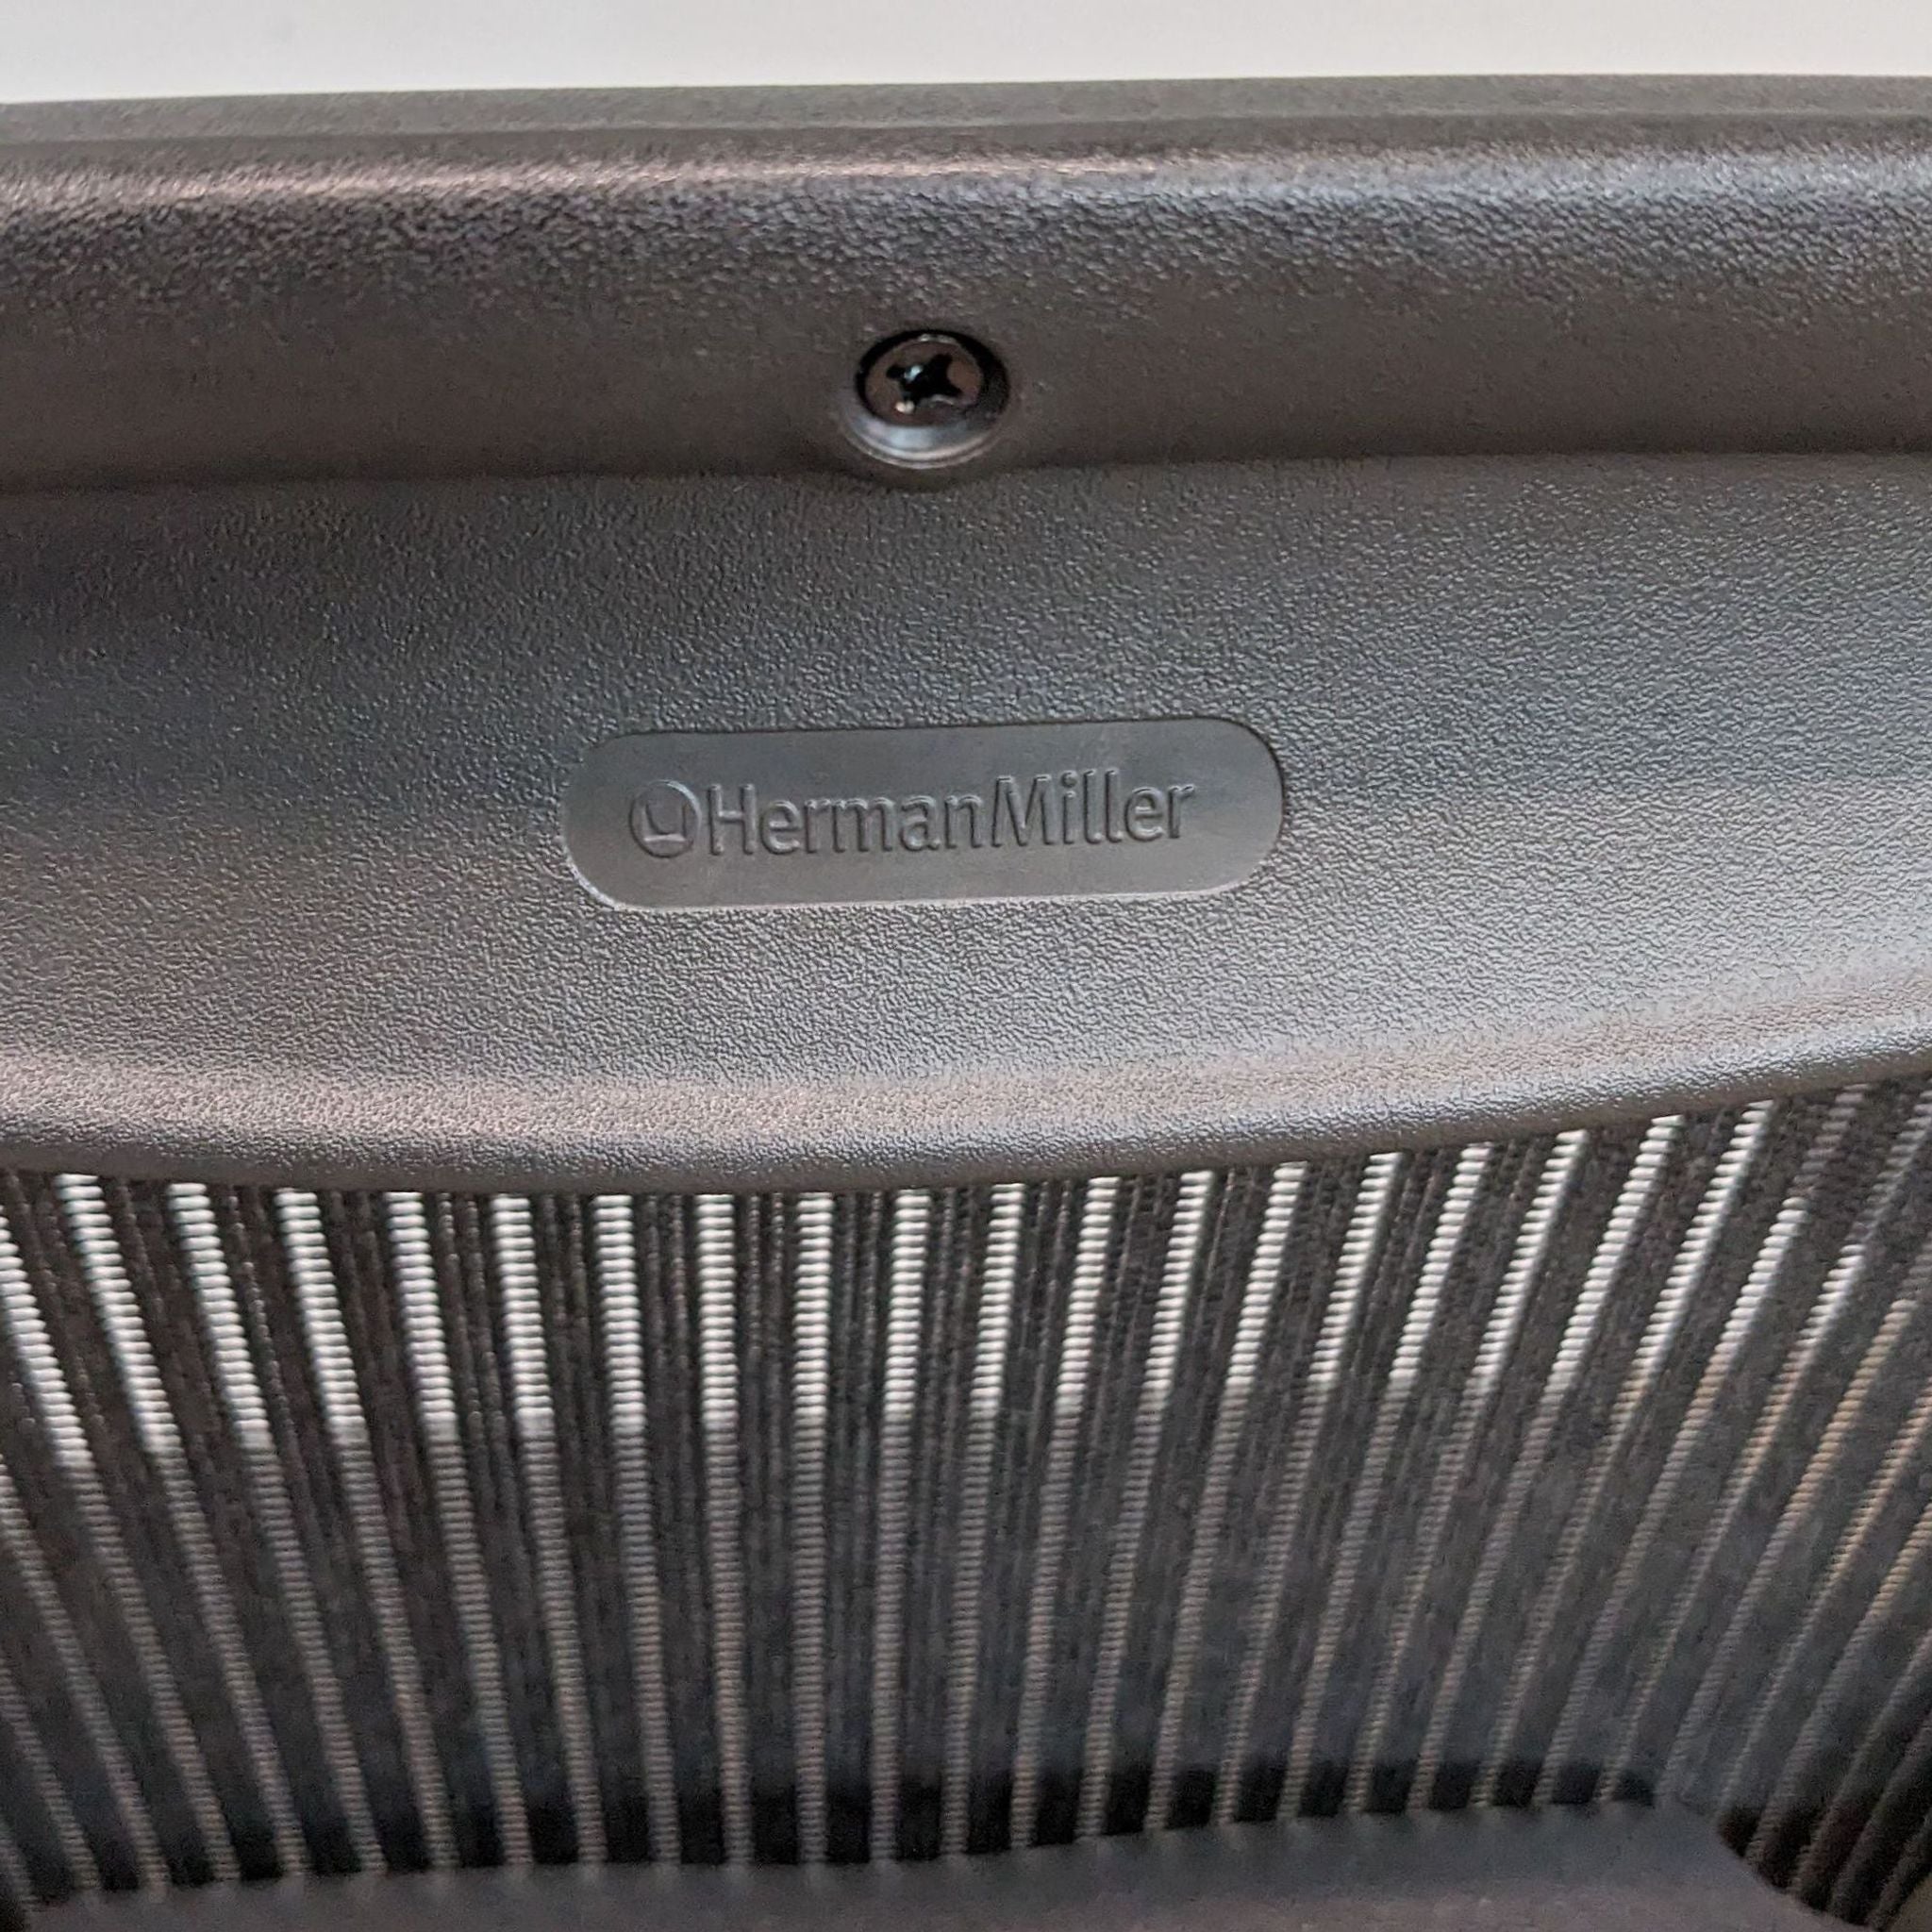 Close-up of a Herman Miller logo on an Aeron chair with black mesh, symbolizing quality ergonomic office furniture.